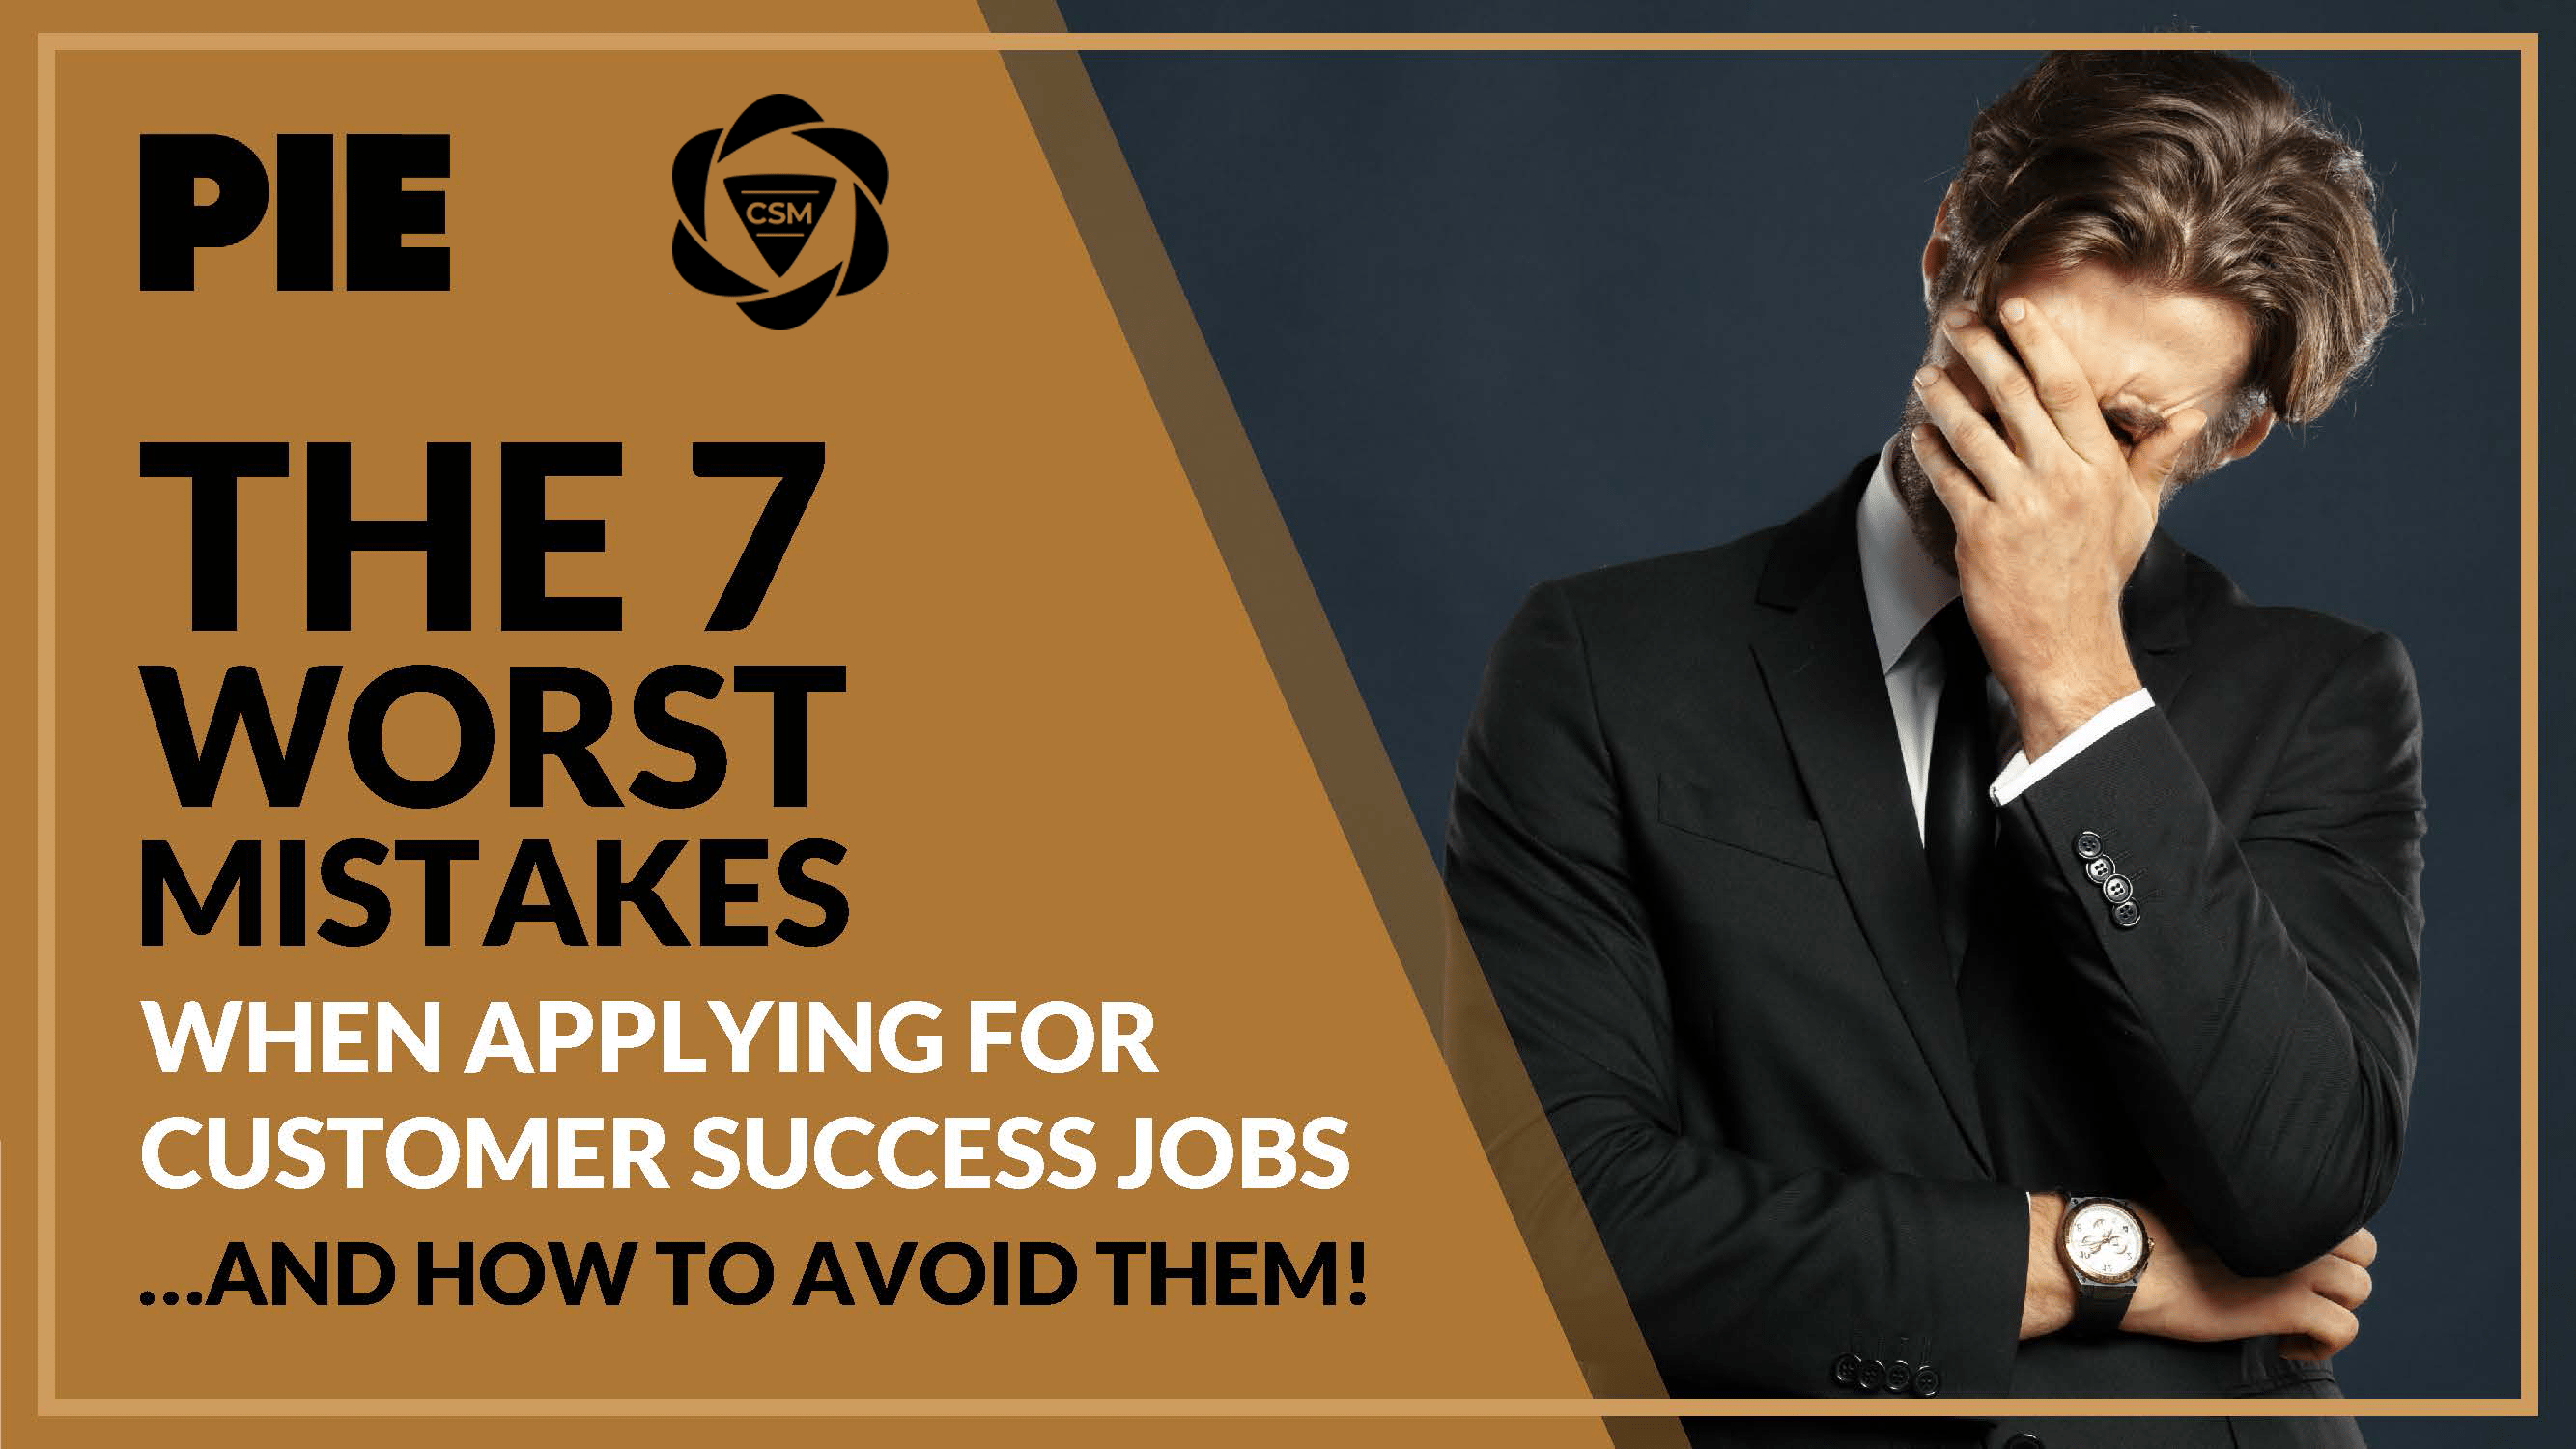 The 7 Worst Mistakes when Applying for Customer Success Jobs